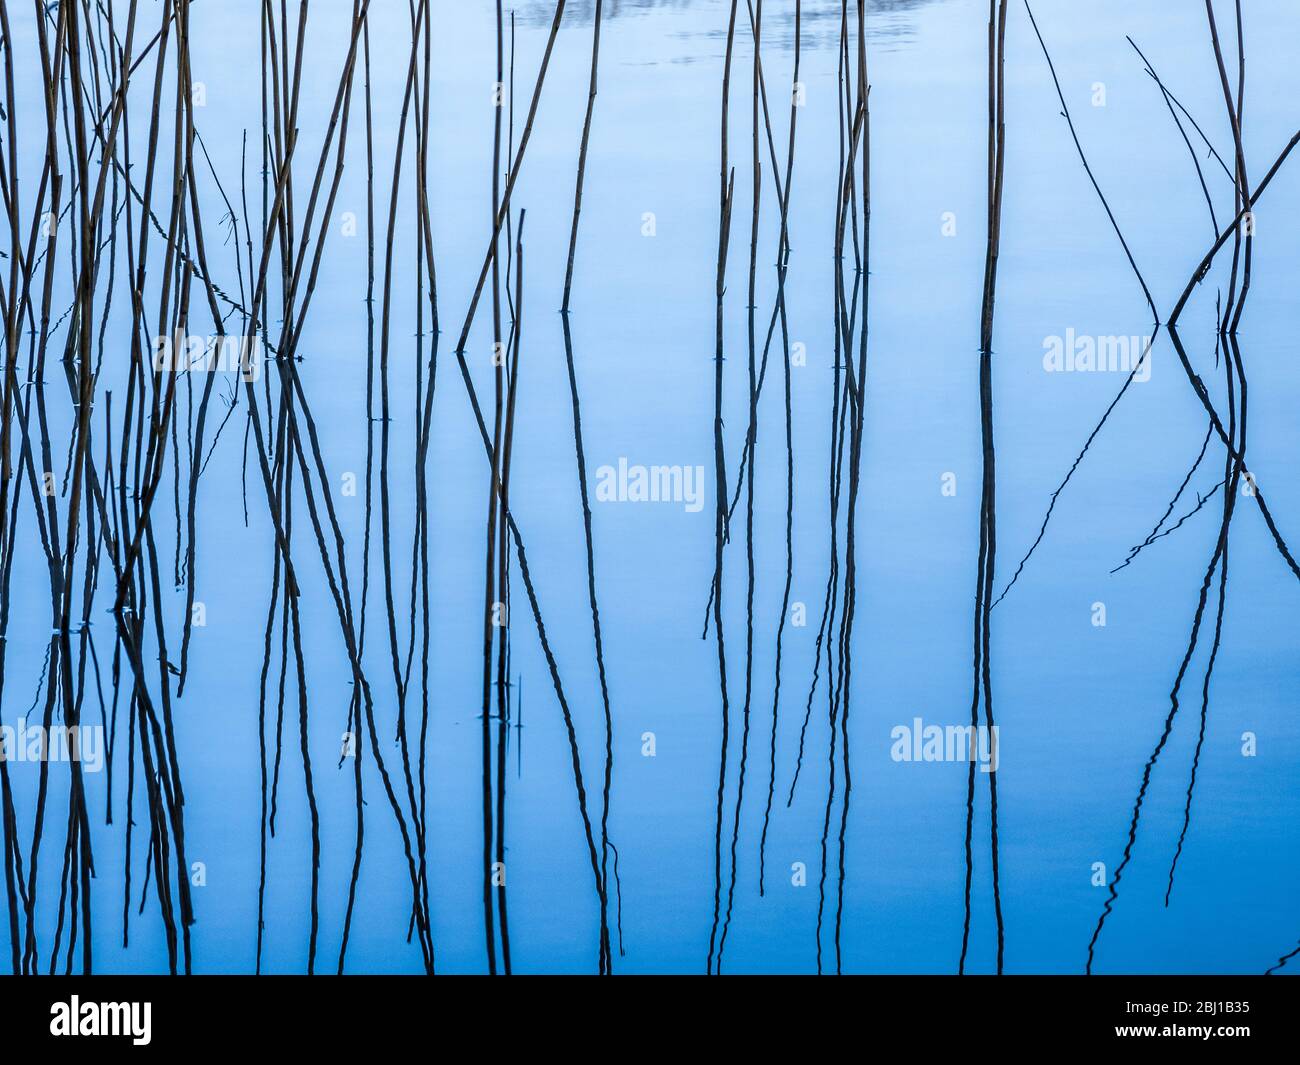 Reeds and their reflection in the still water of a lake. Stock Photo